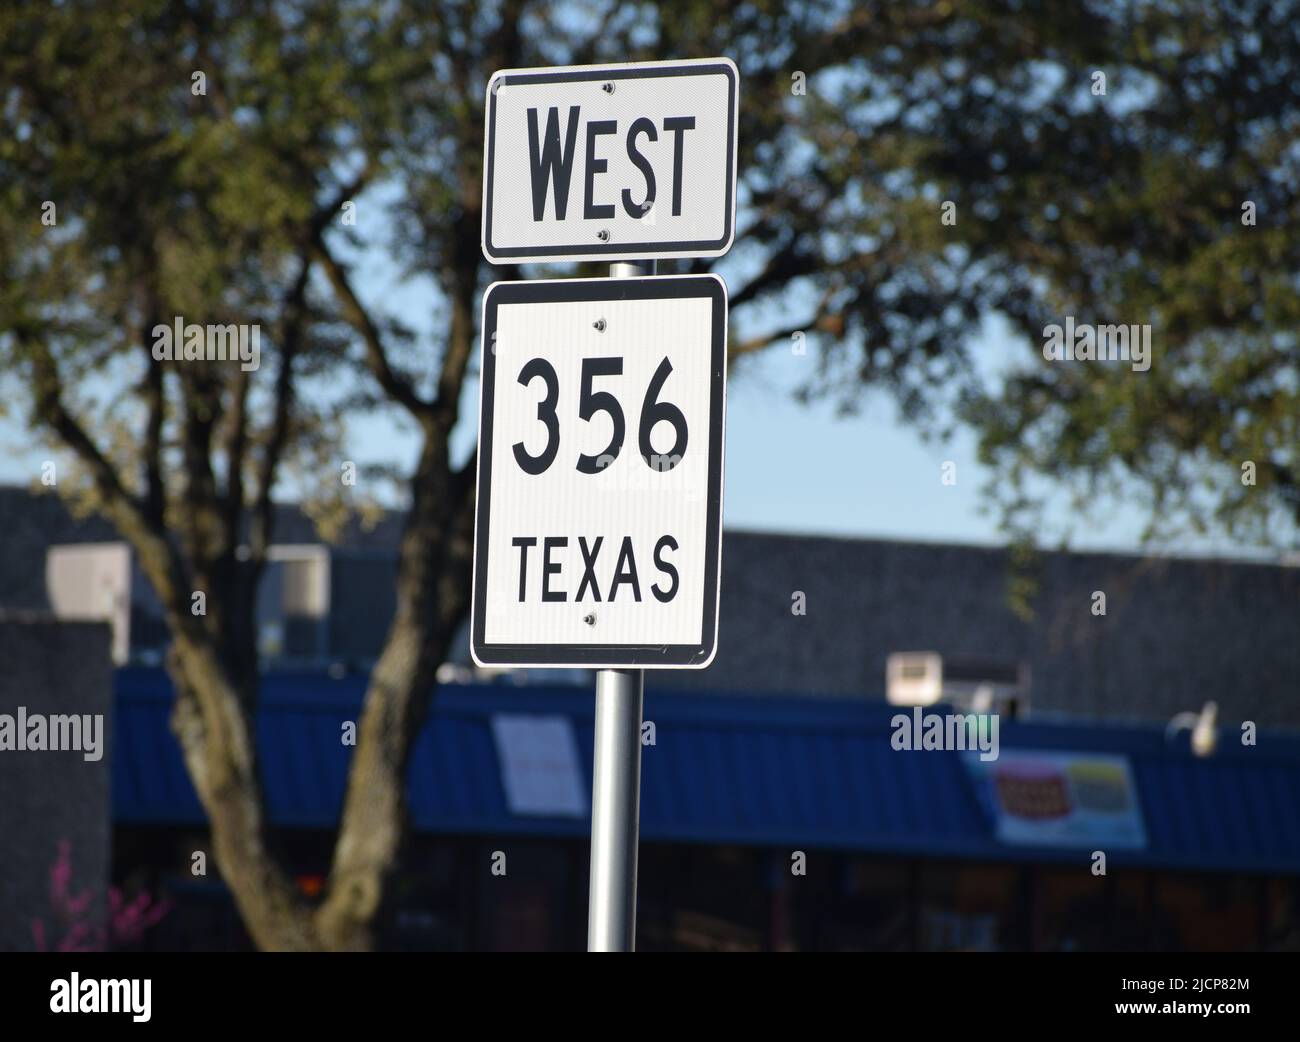 Texas State Highway 356 Road sign (West) Stockfoto